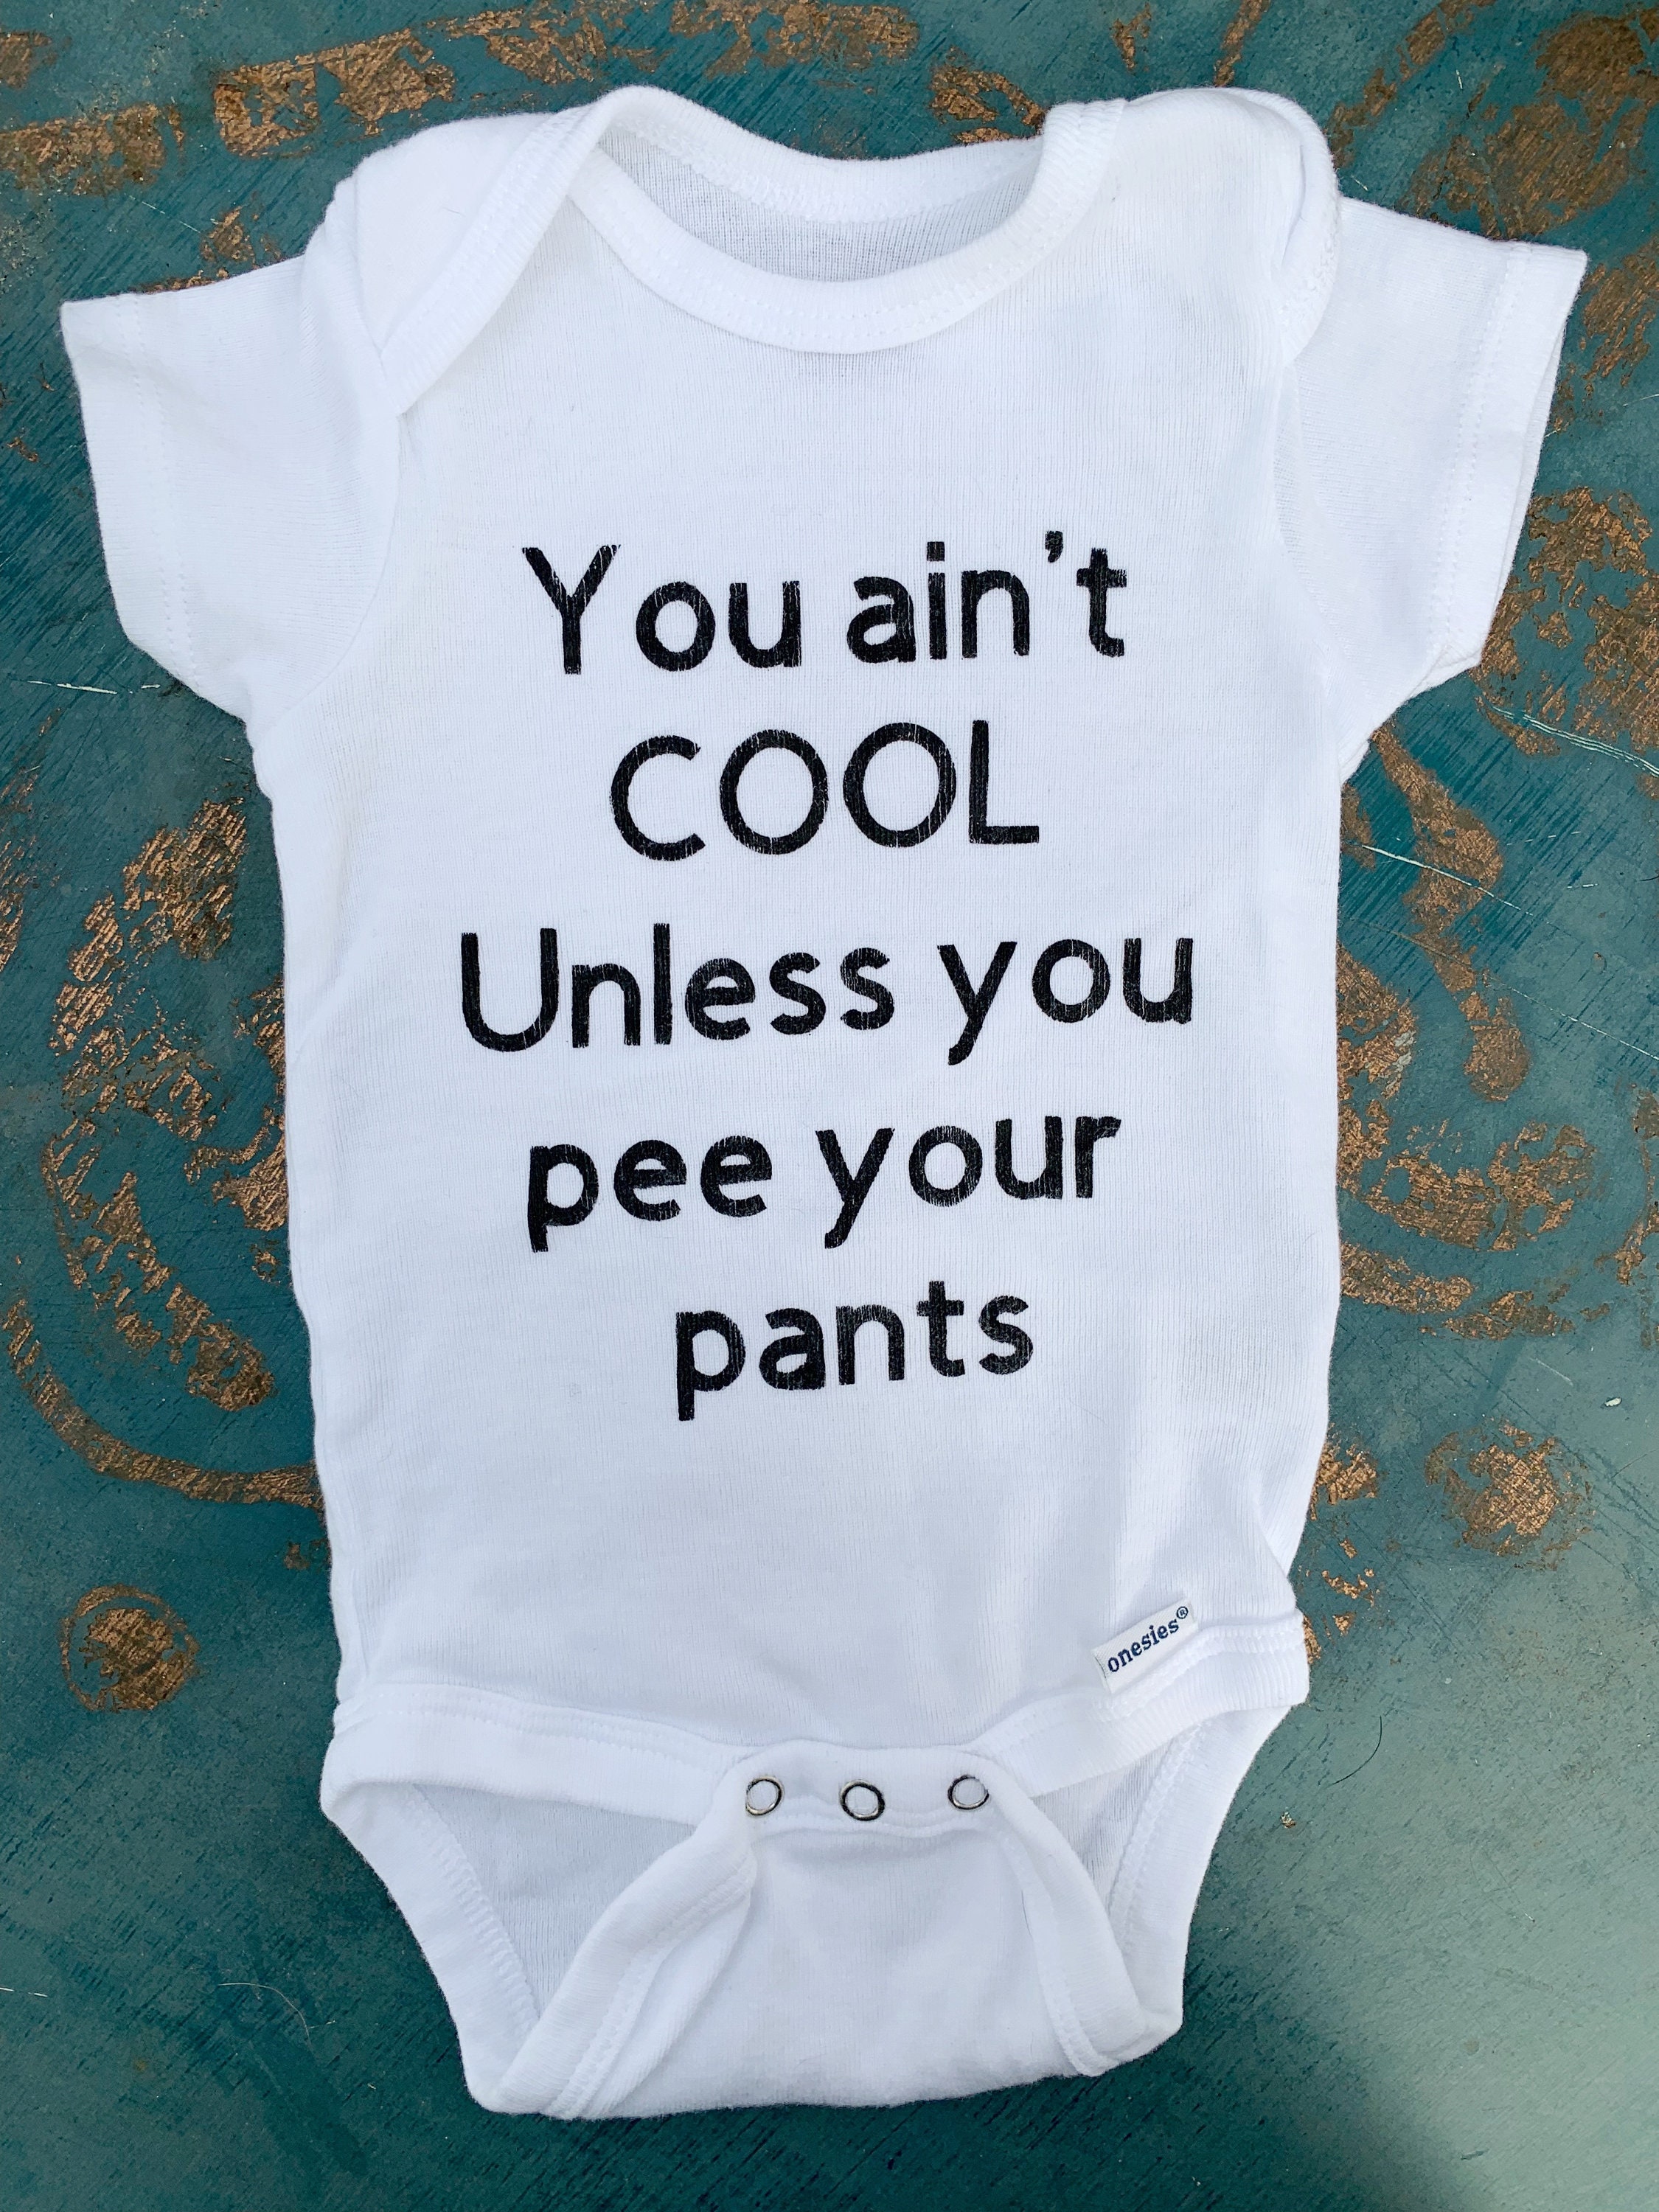 Details about   You Ain't Cool Unless You Pee Your Pants Funny Baby Bodysuit 